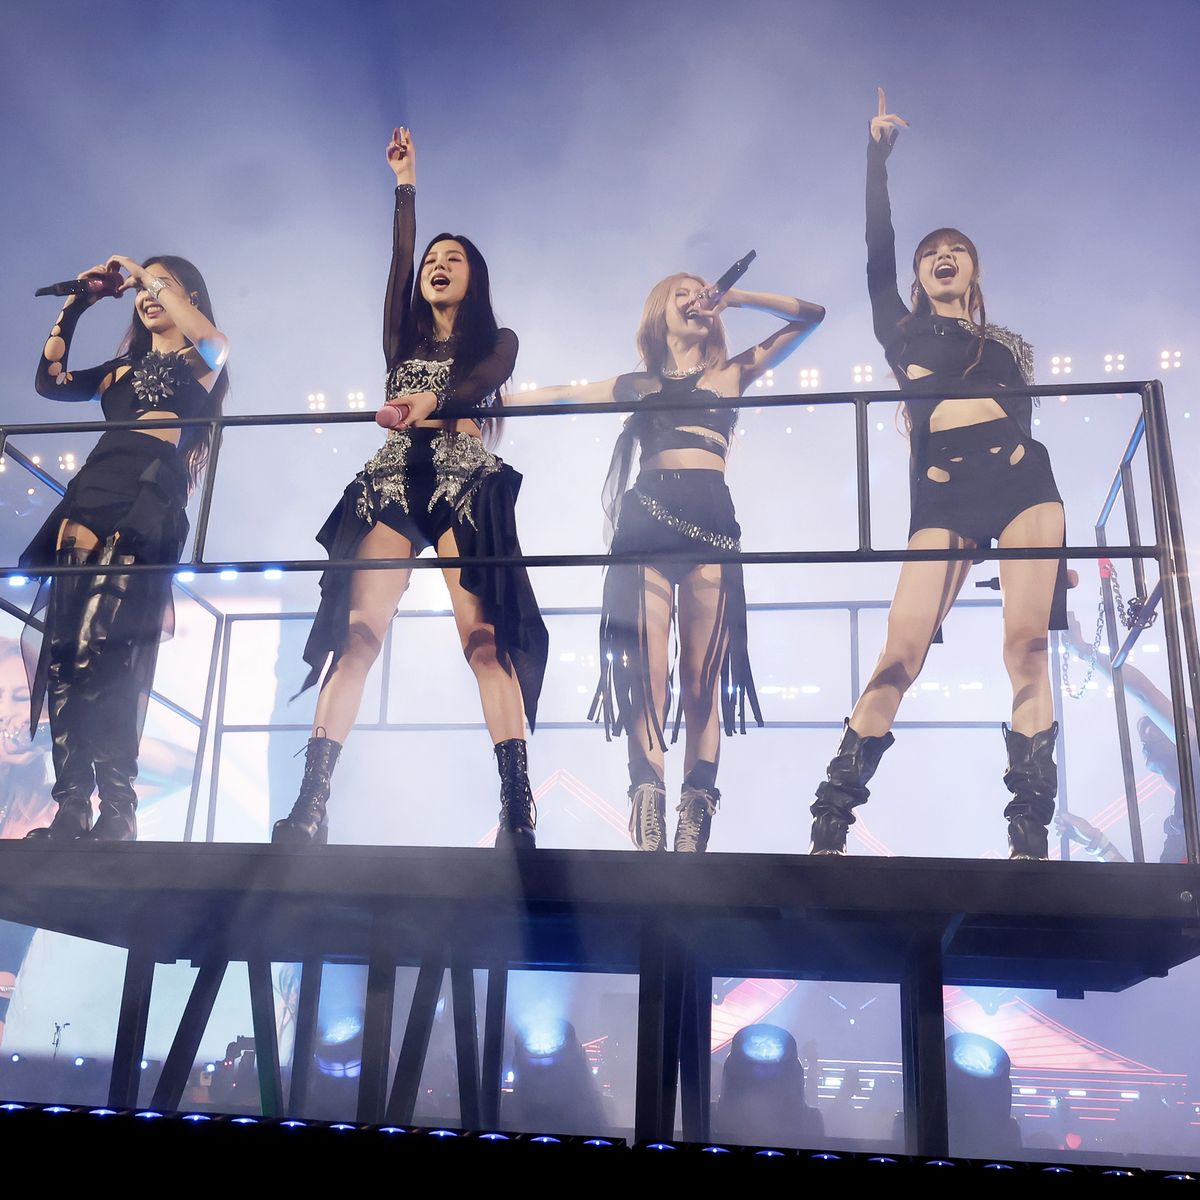 https://hips.hearstapps.com/hmg-prod/images/jennie-jisoo-ros-c3-a9-and-lisa-of-blackpink-perform-at-the-news-photo-1681660113.jpg?crop=0.68343xw:1xh;center,top&resize=1200:*